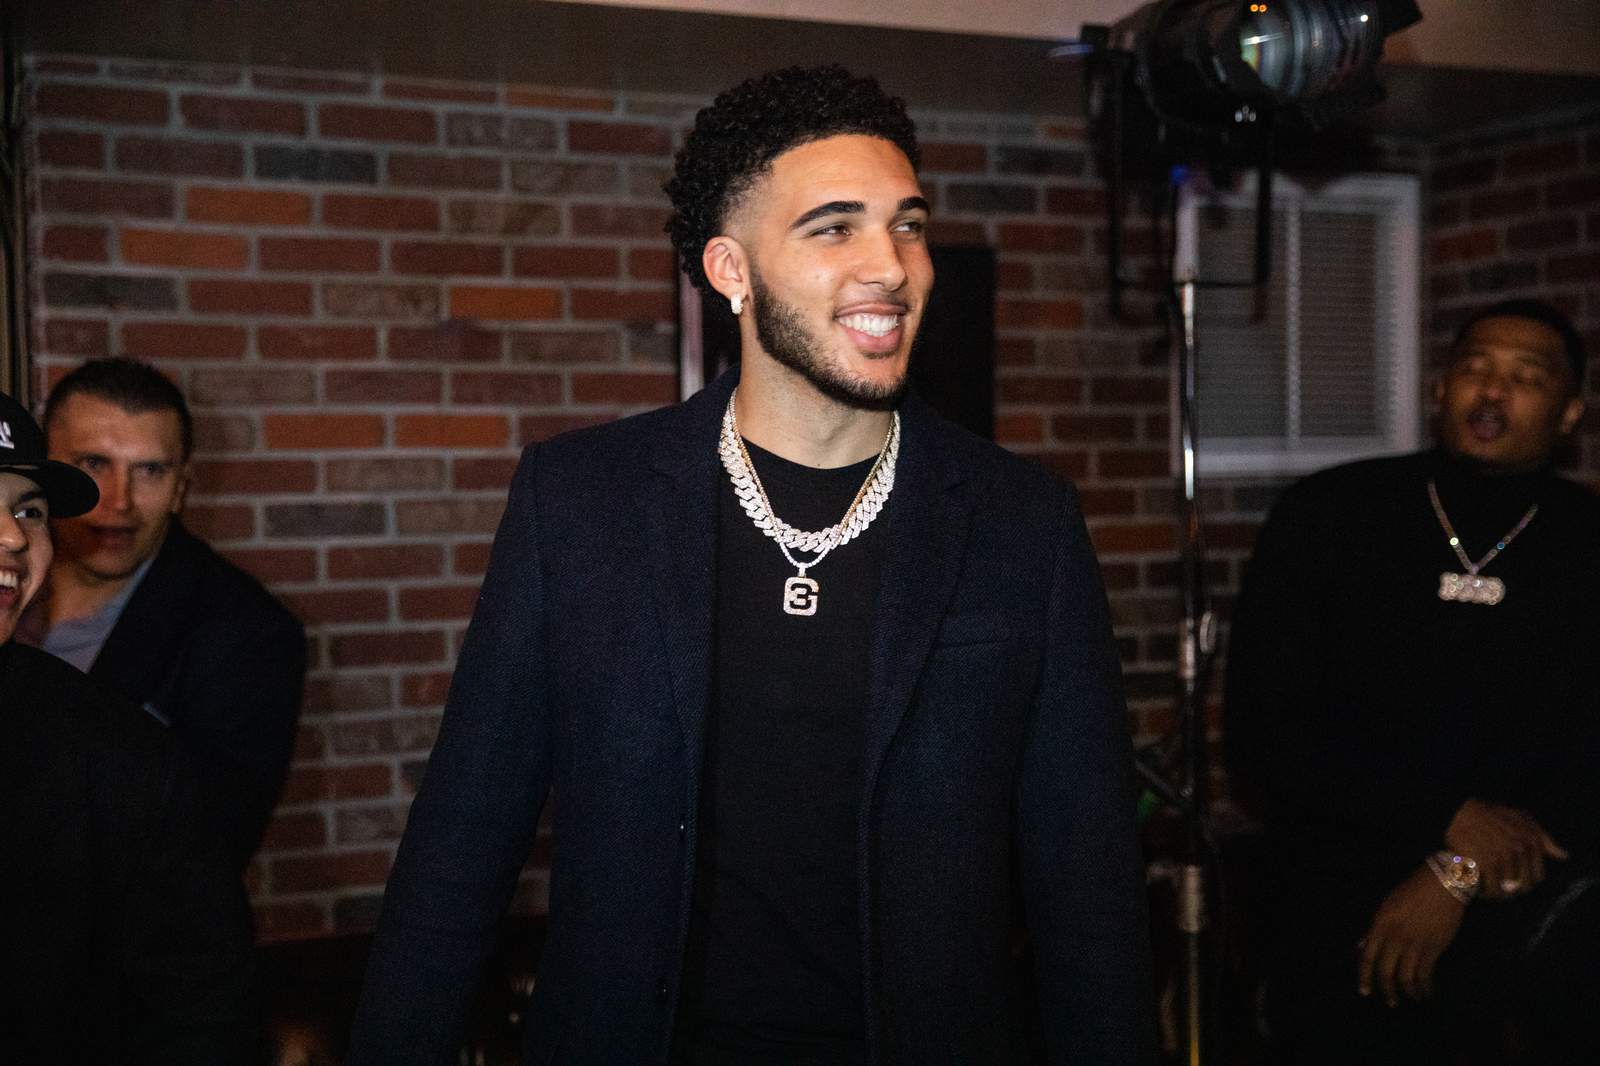 Who is LiAngelo Ball and will he form the team?